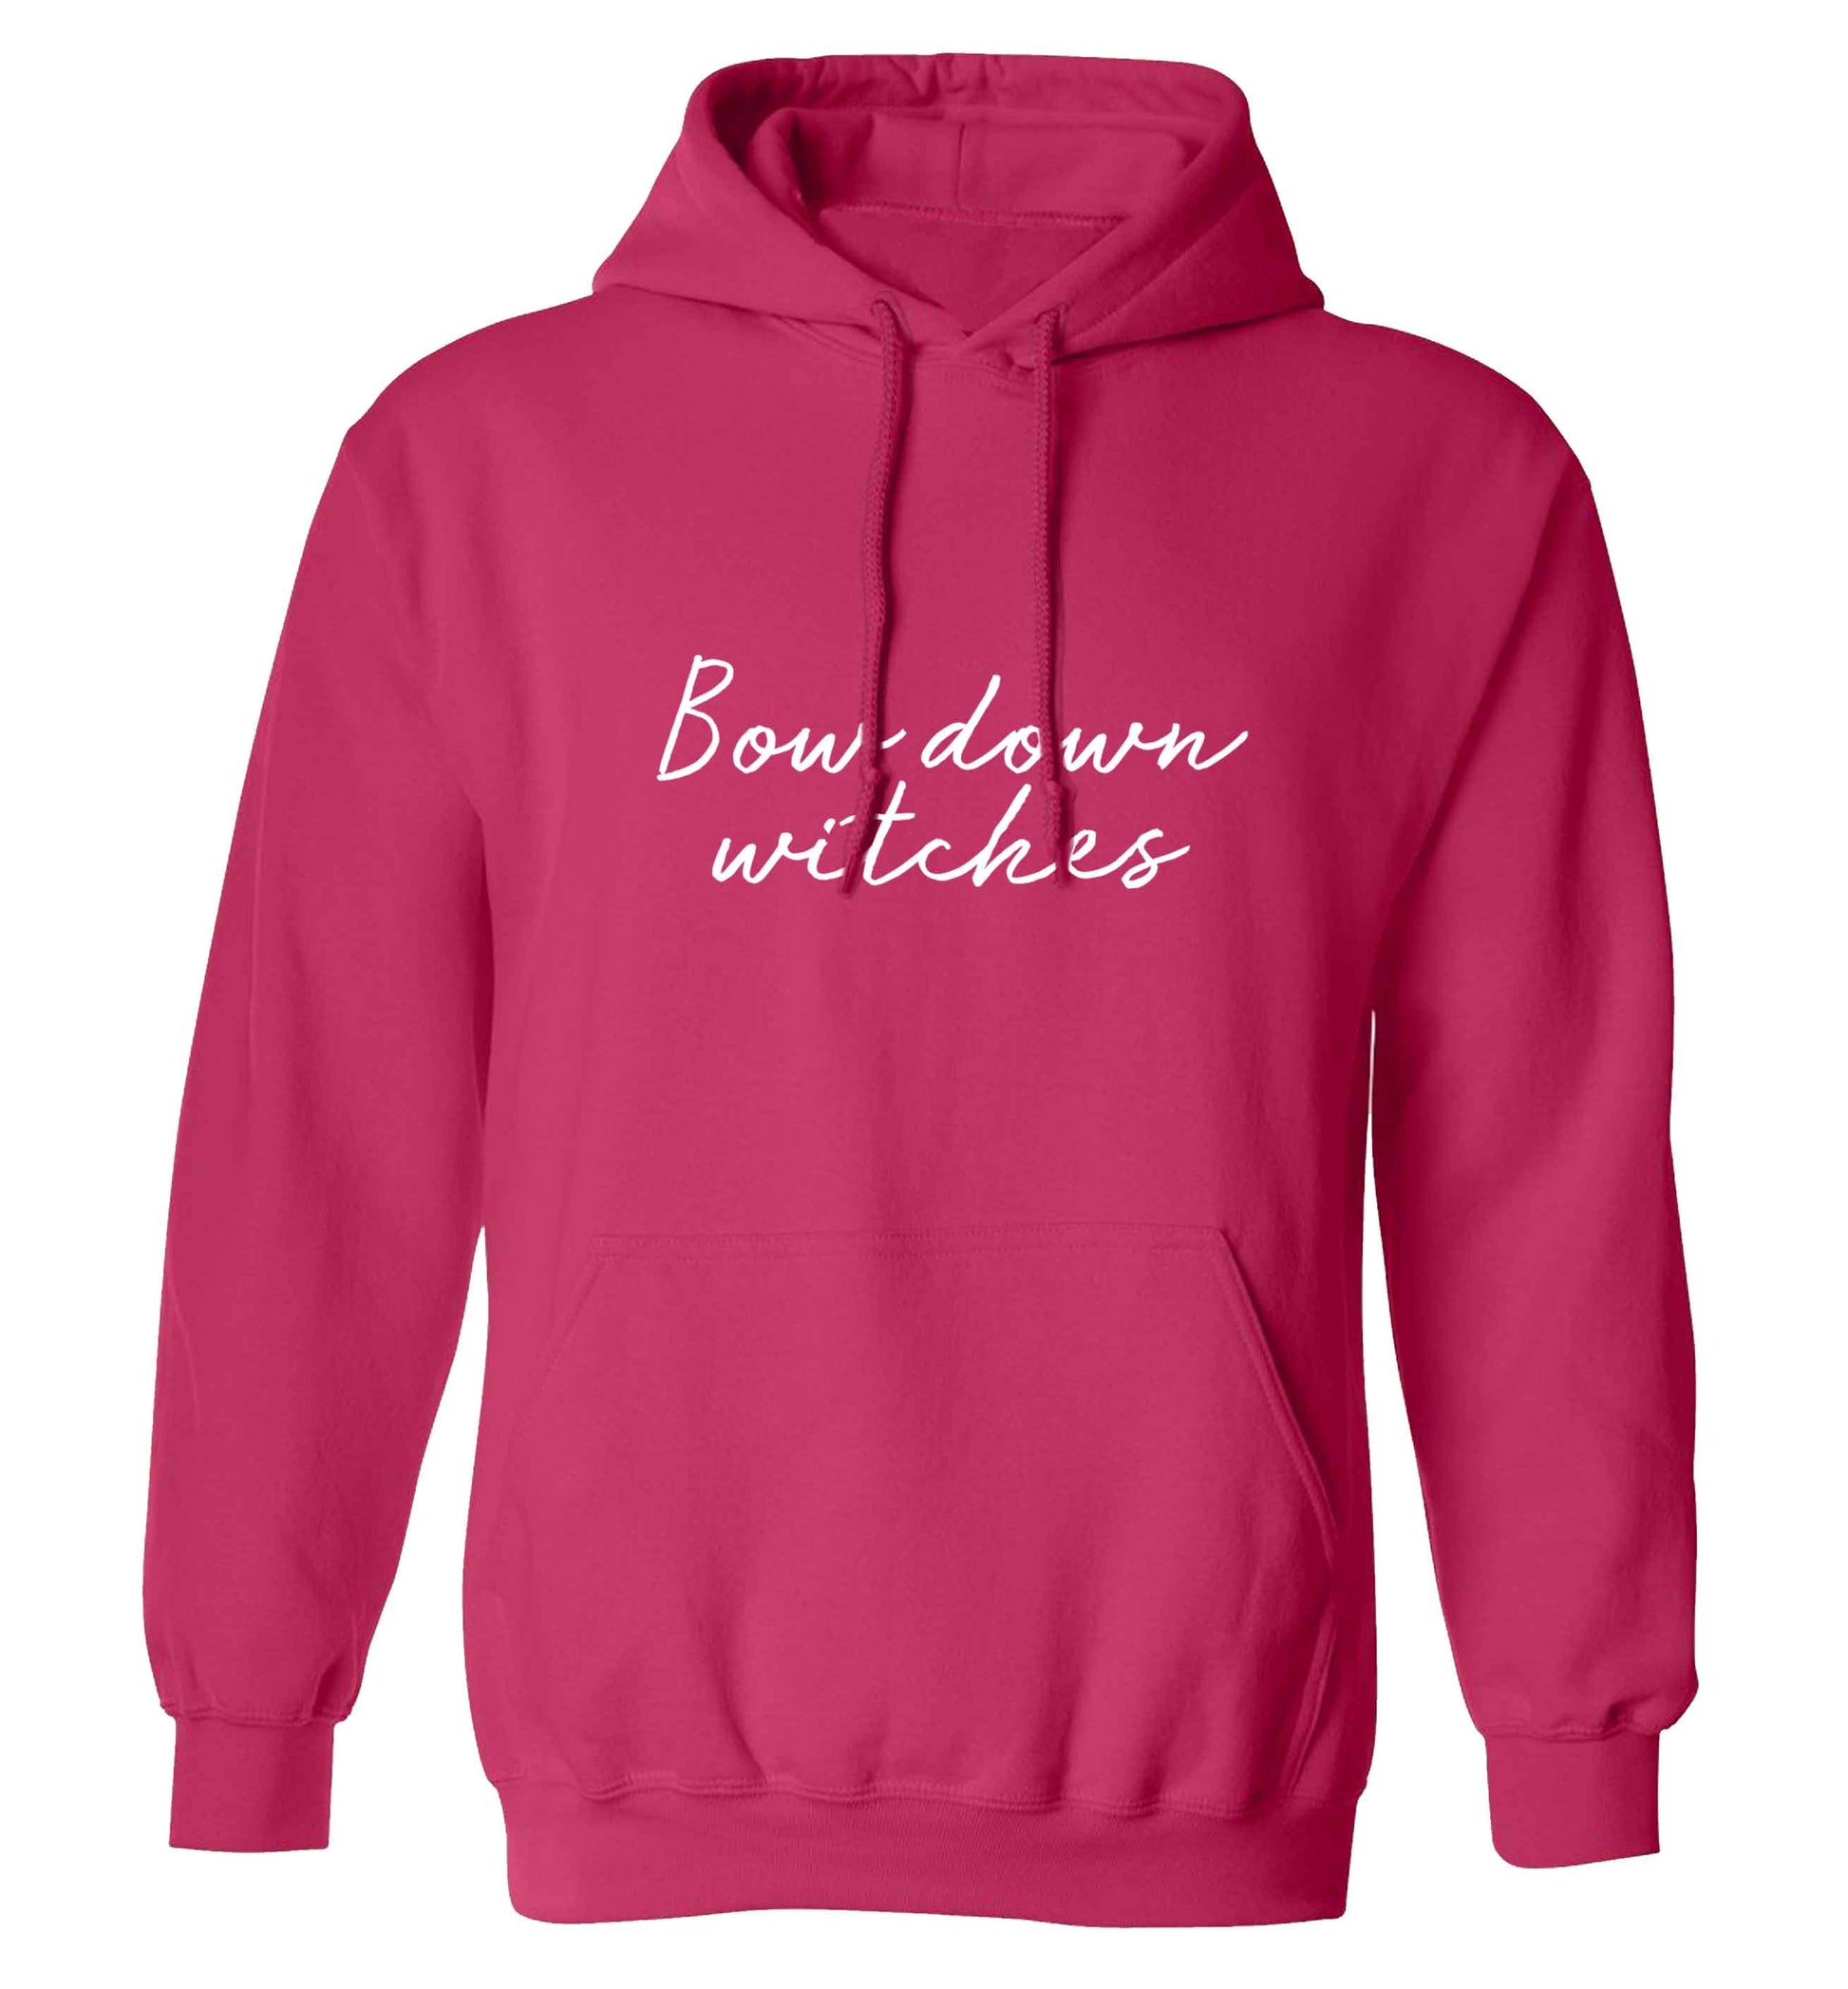 Bow down witches adults unisex pink hoodie 2XL